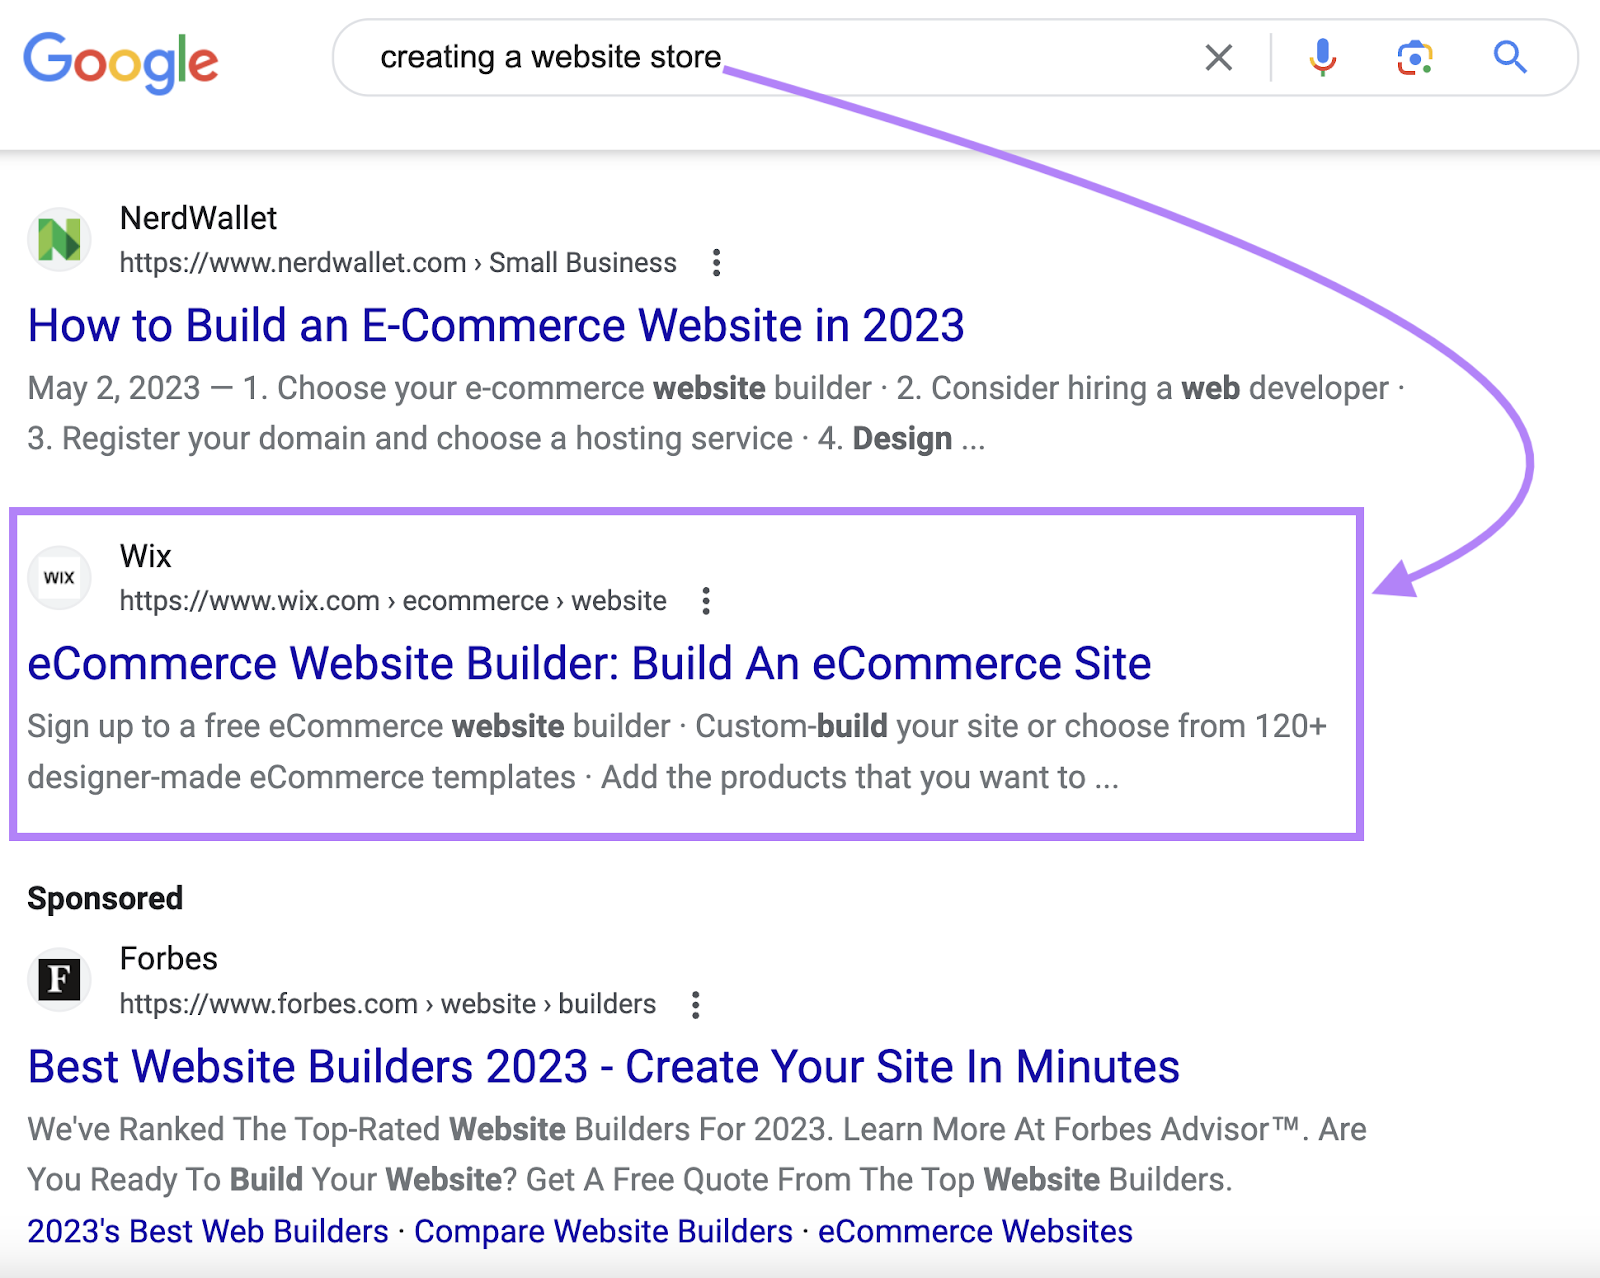 Wix' result on Google SERP for "creating a website store” query